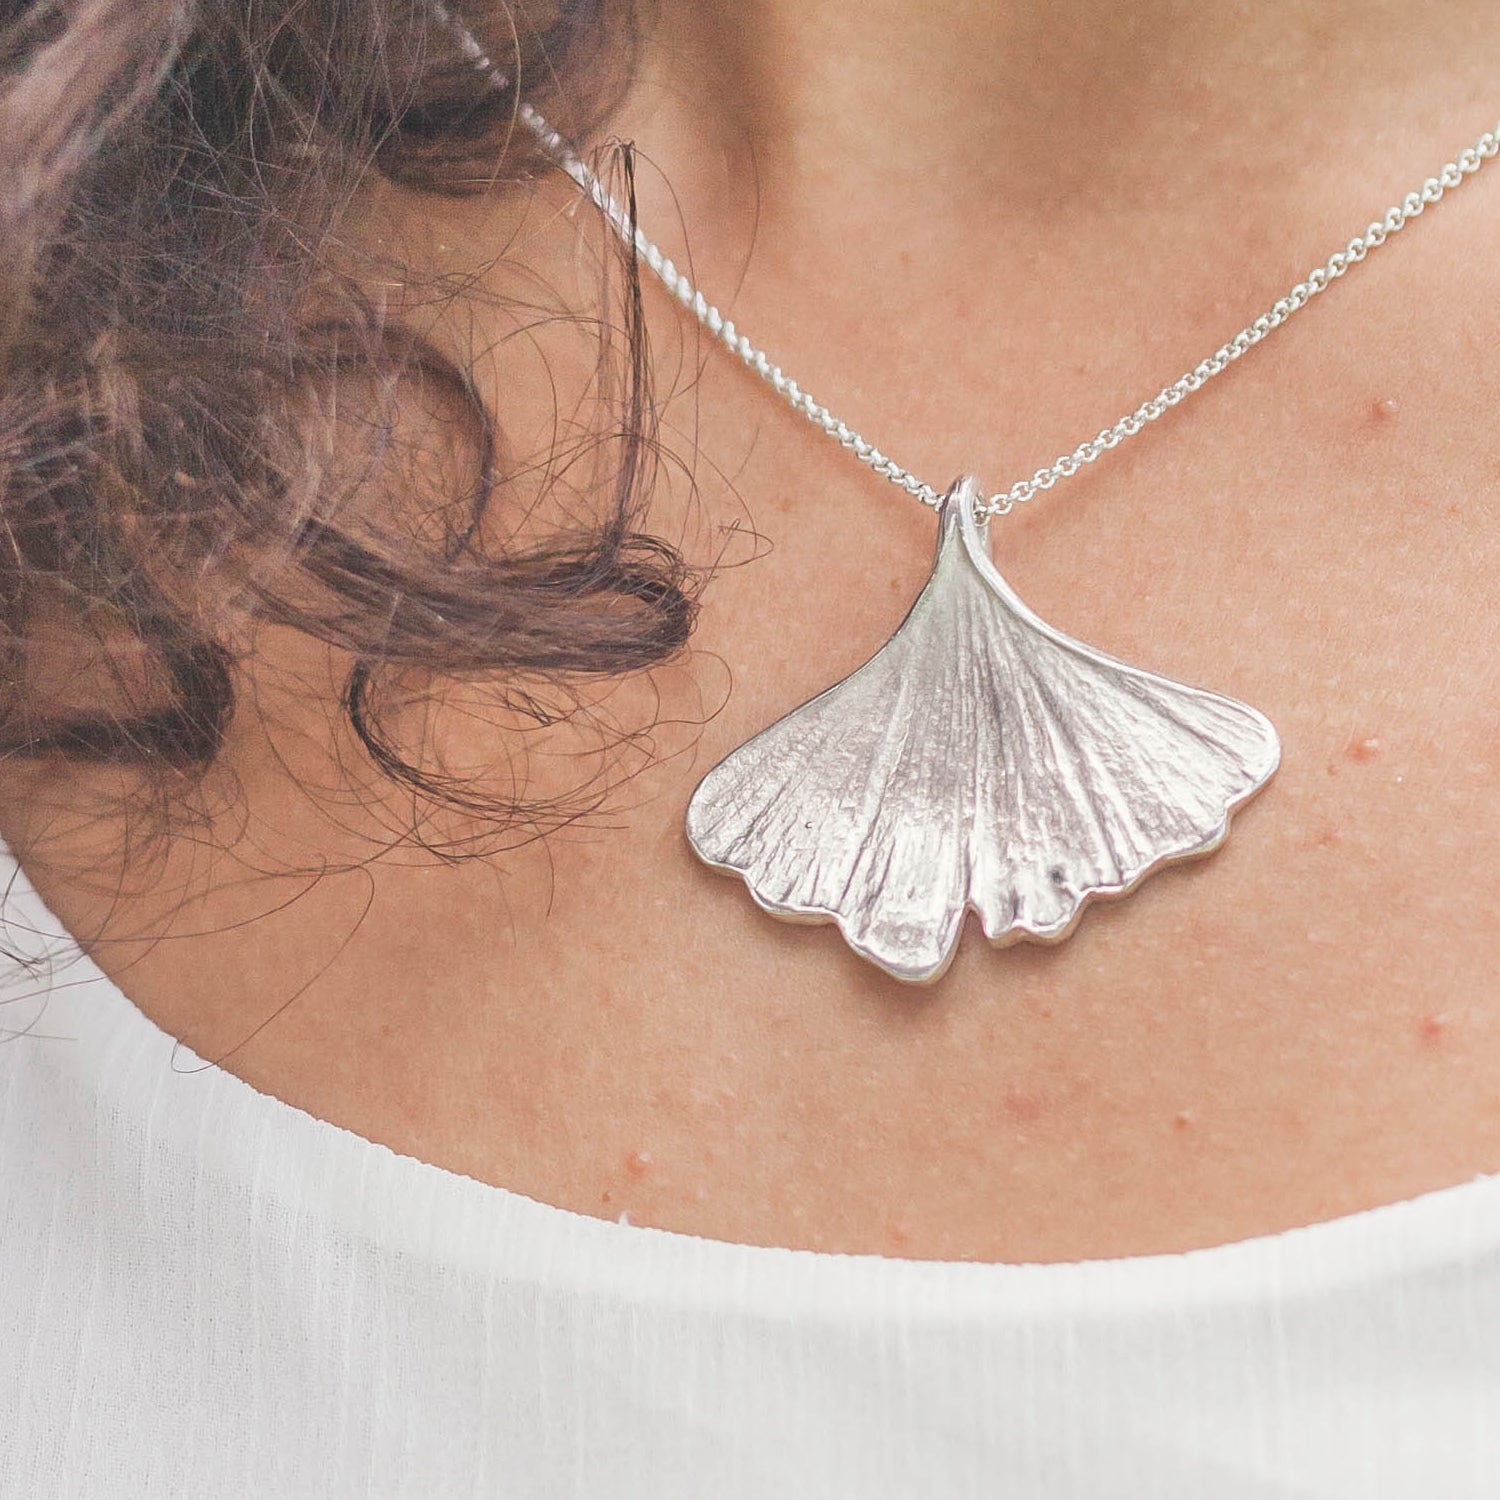 sterling silver ginkgo necklace worn with white shirt